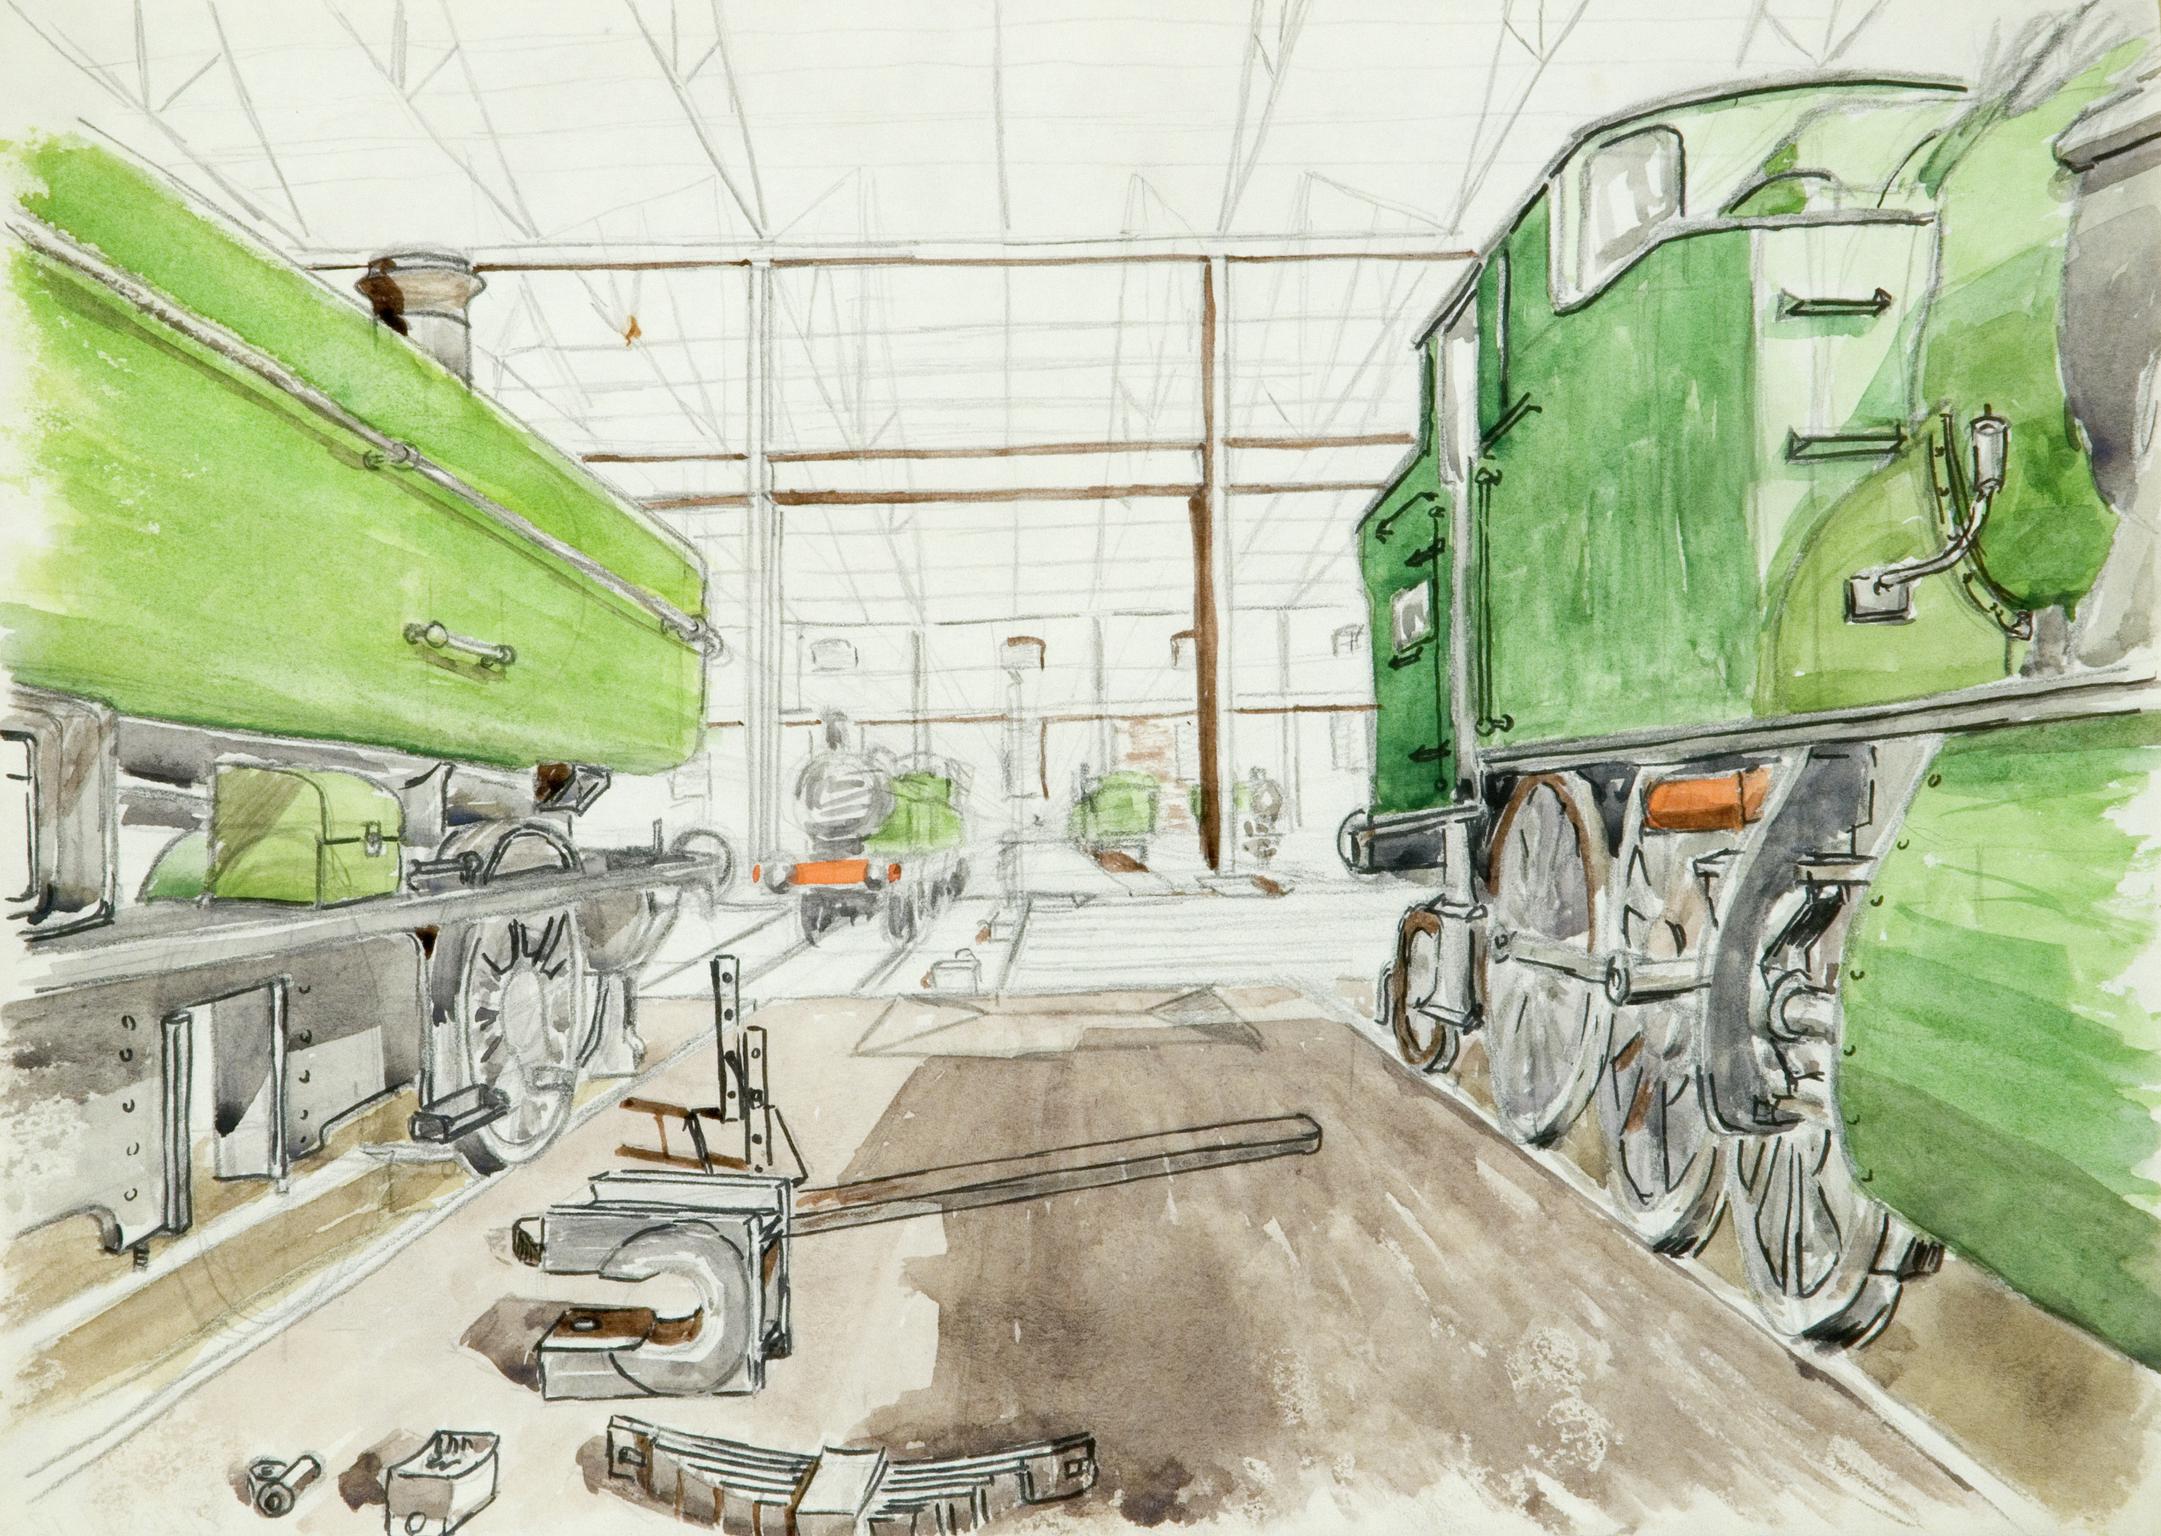 Locomotive at works, painting